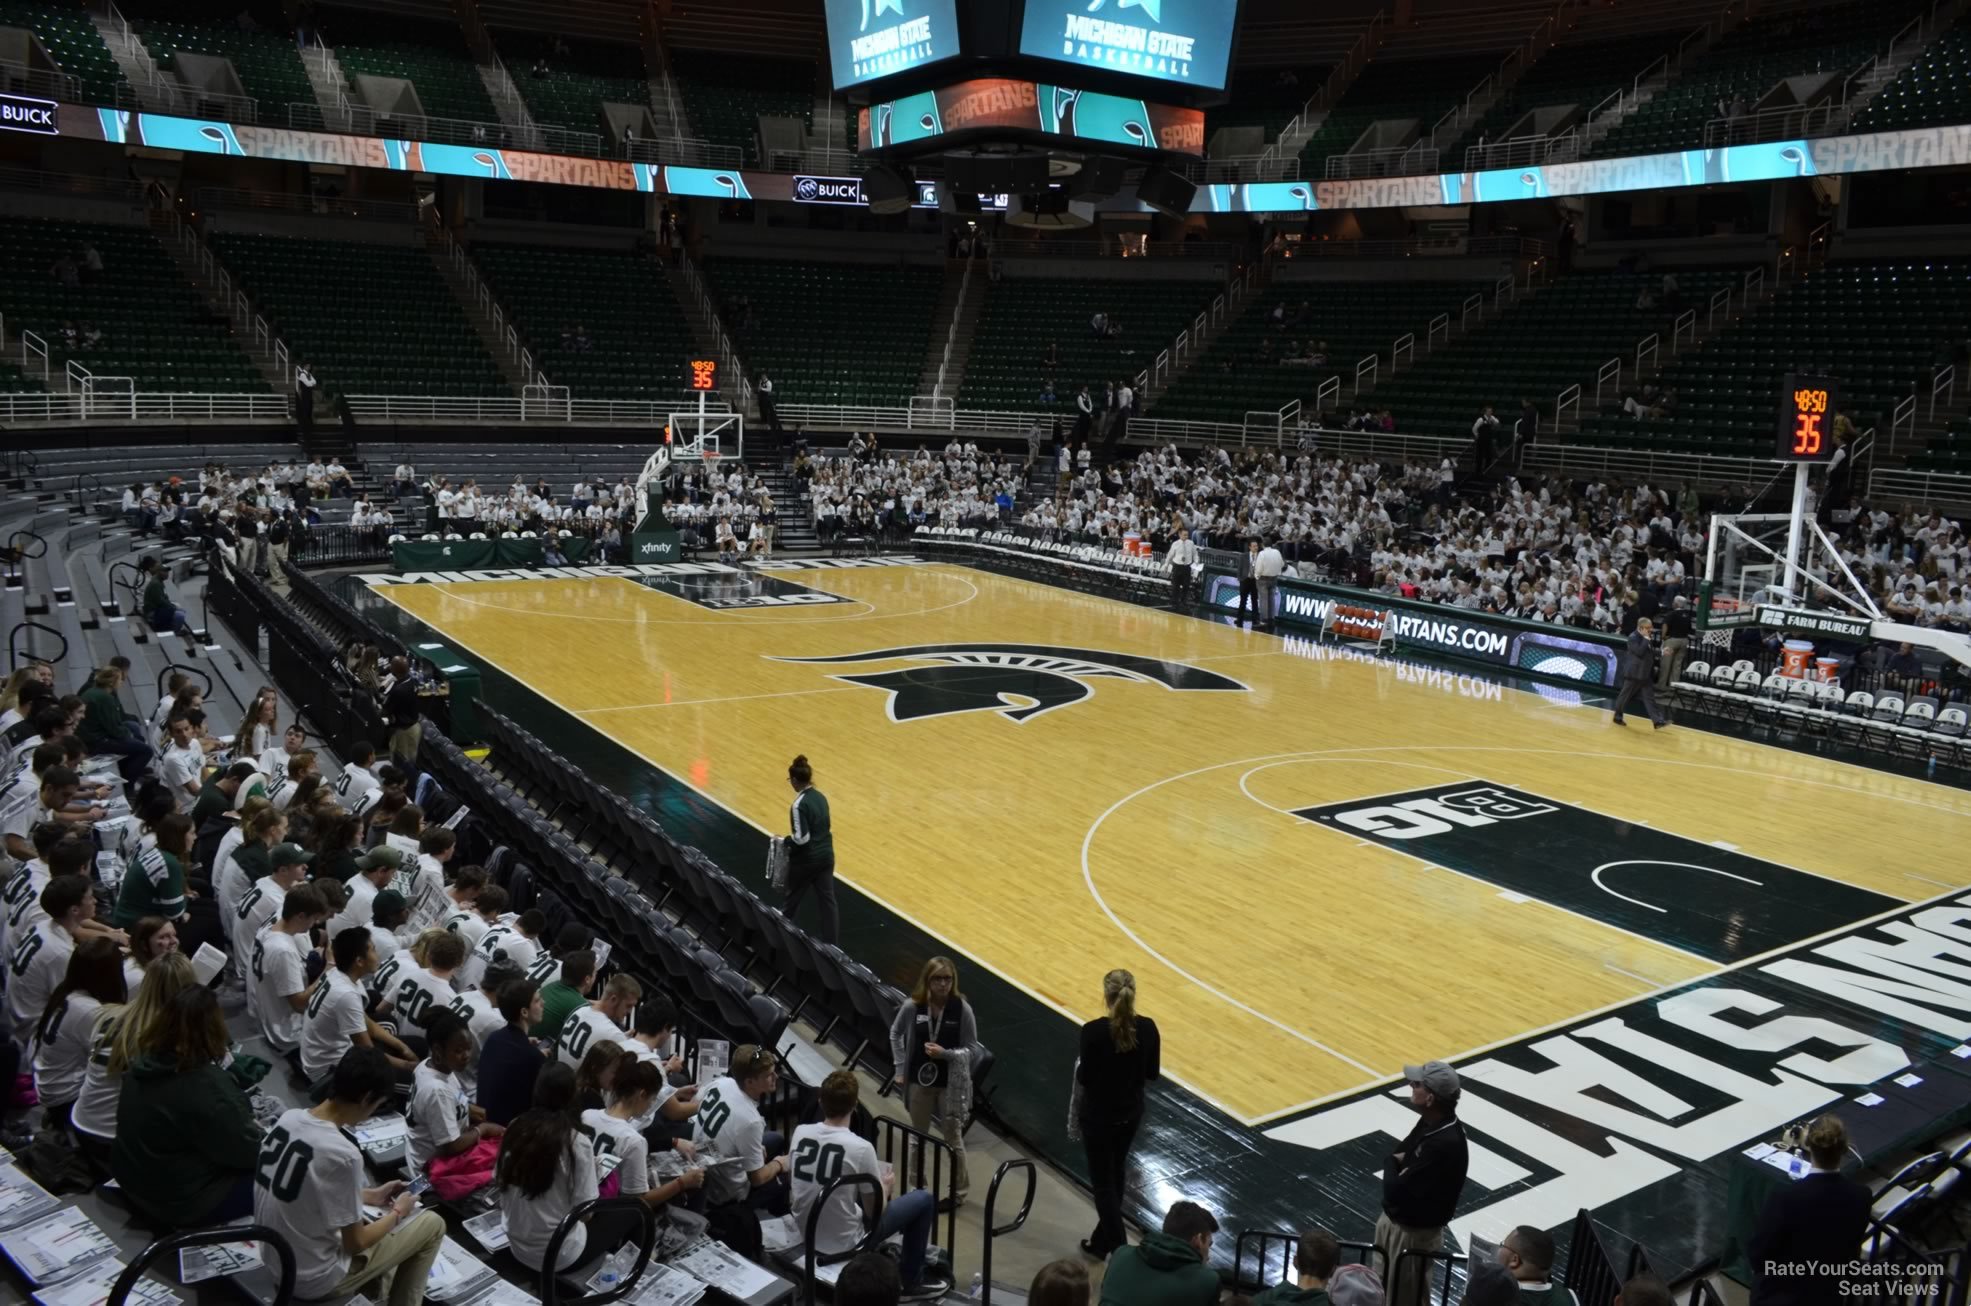 section 124, row 13 seat view  - breslin center